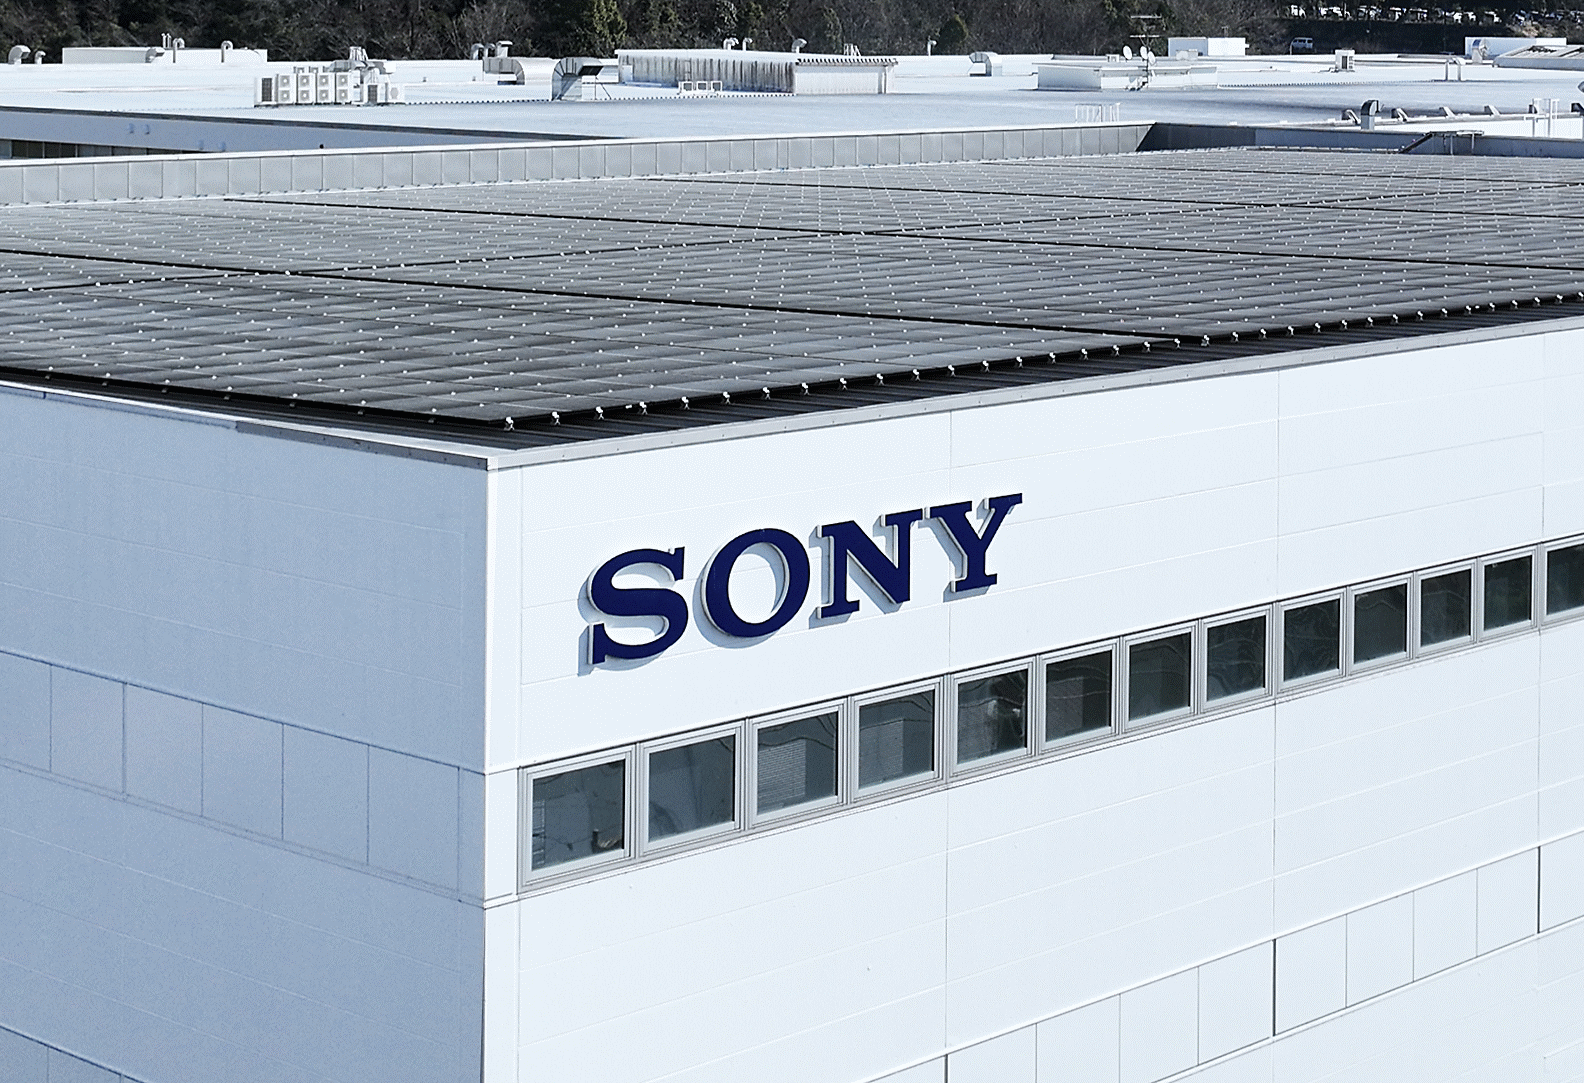 Photograph showing factory roof with solar panel and “SONY” logo